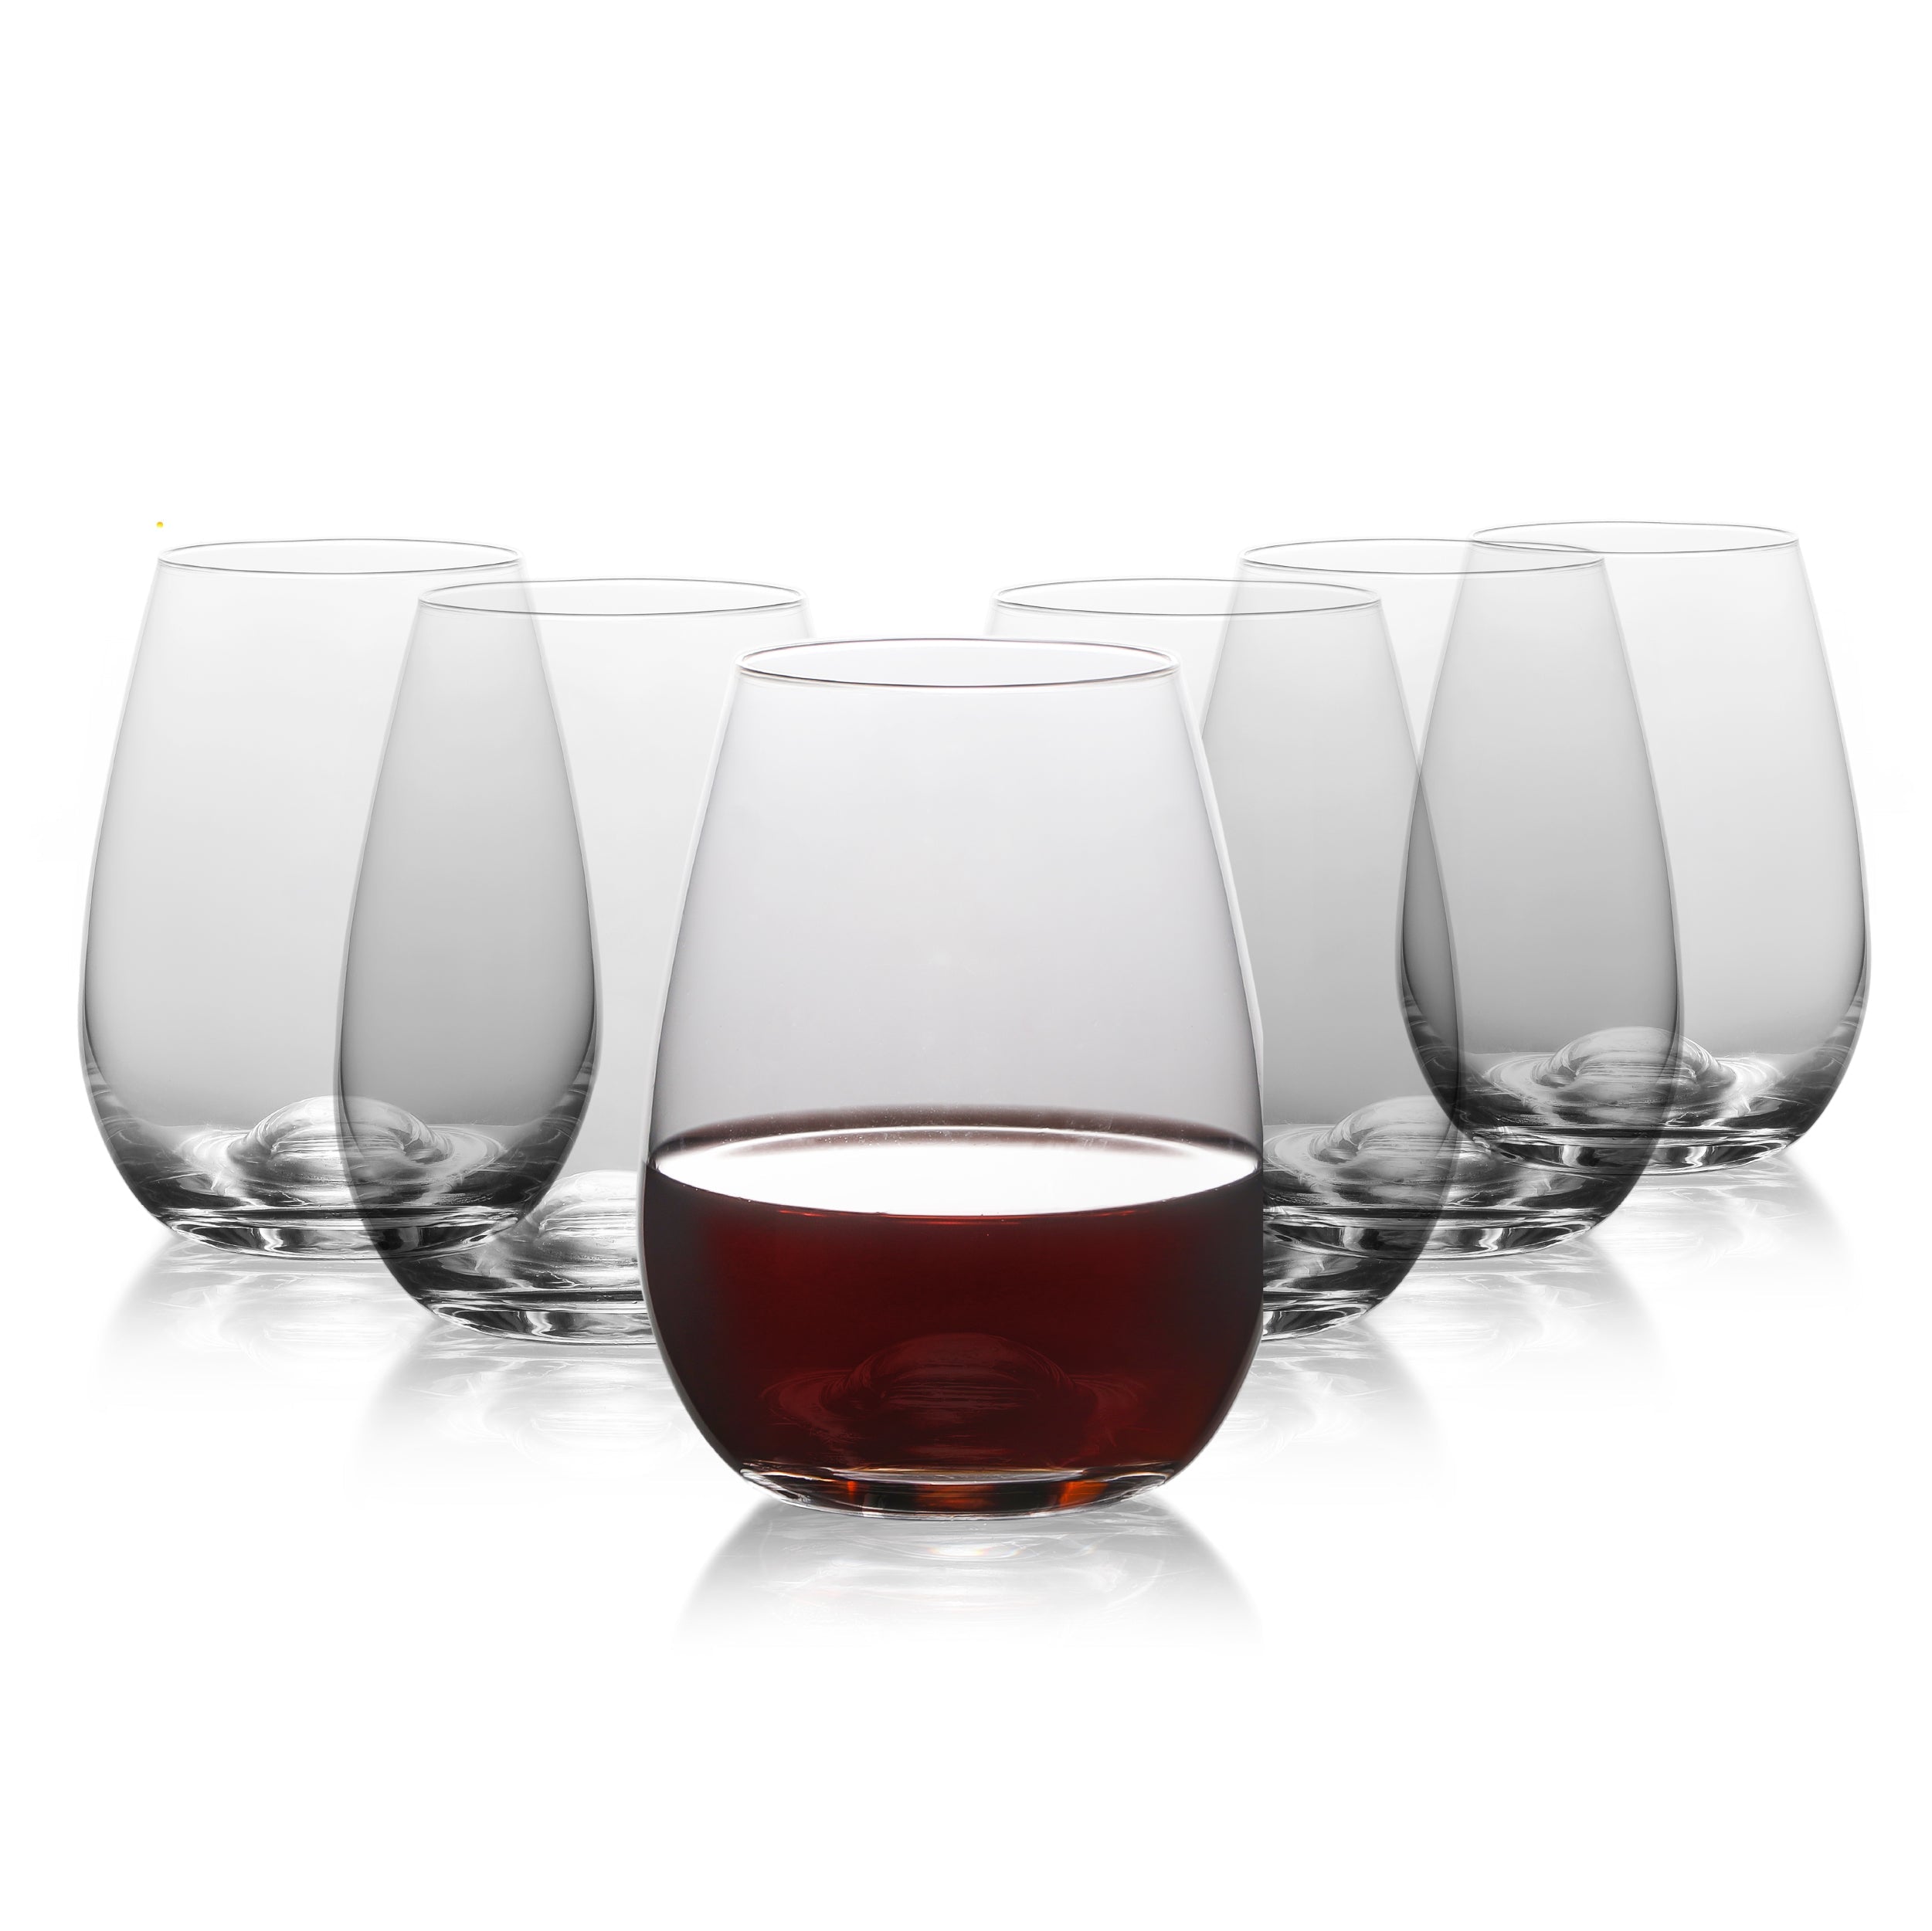 TABLE 12 15.5-Ounce Stemless Wine Glasses, Set of 6, Lead-Free Crystal, Break Resistant